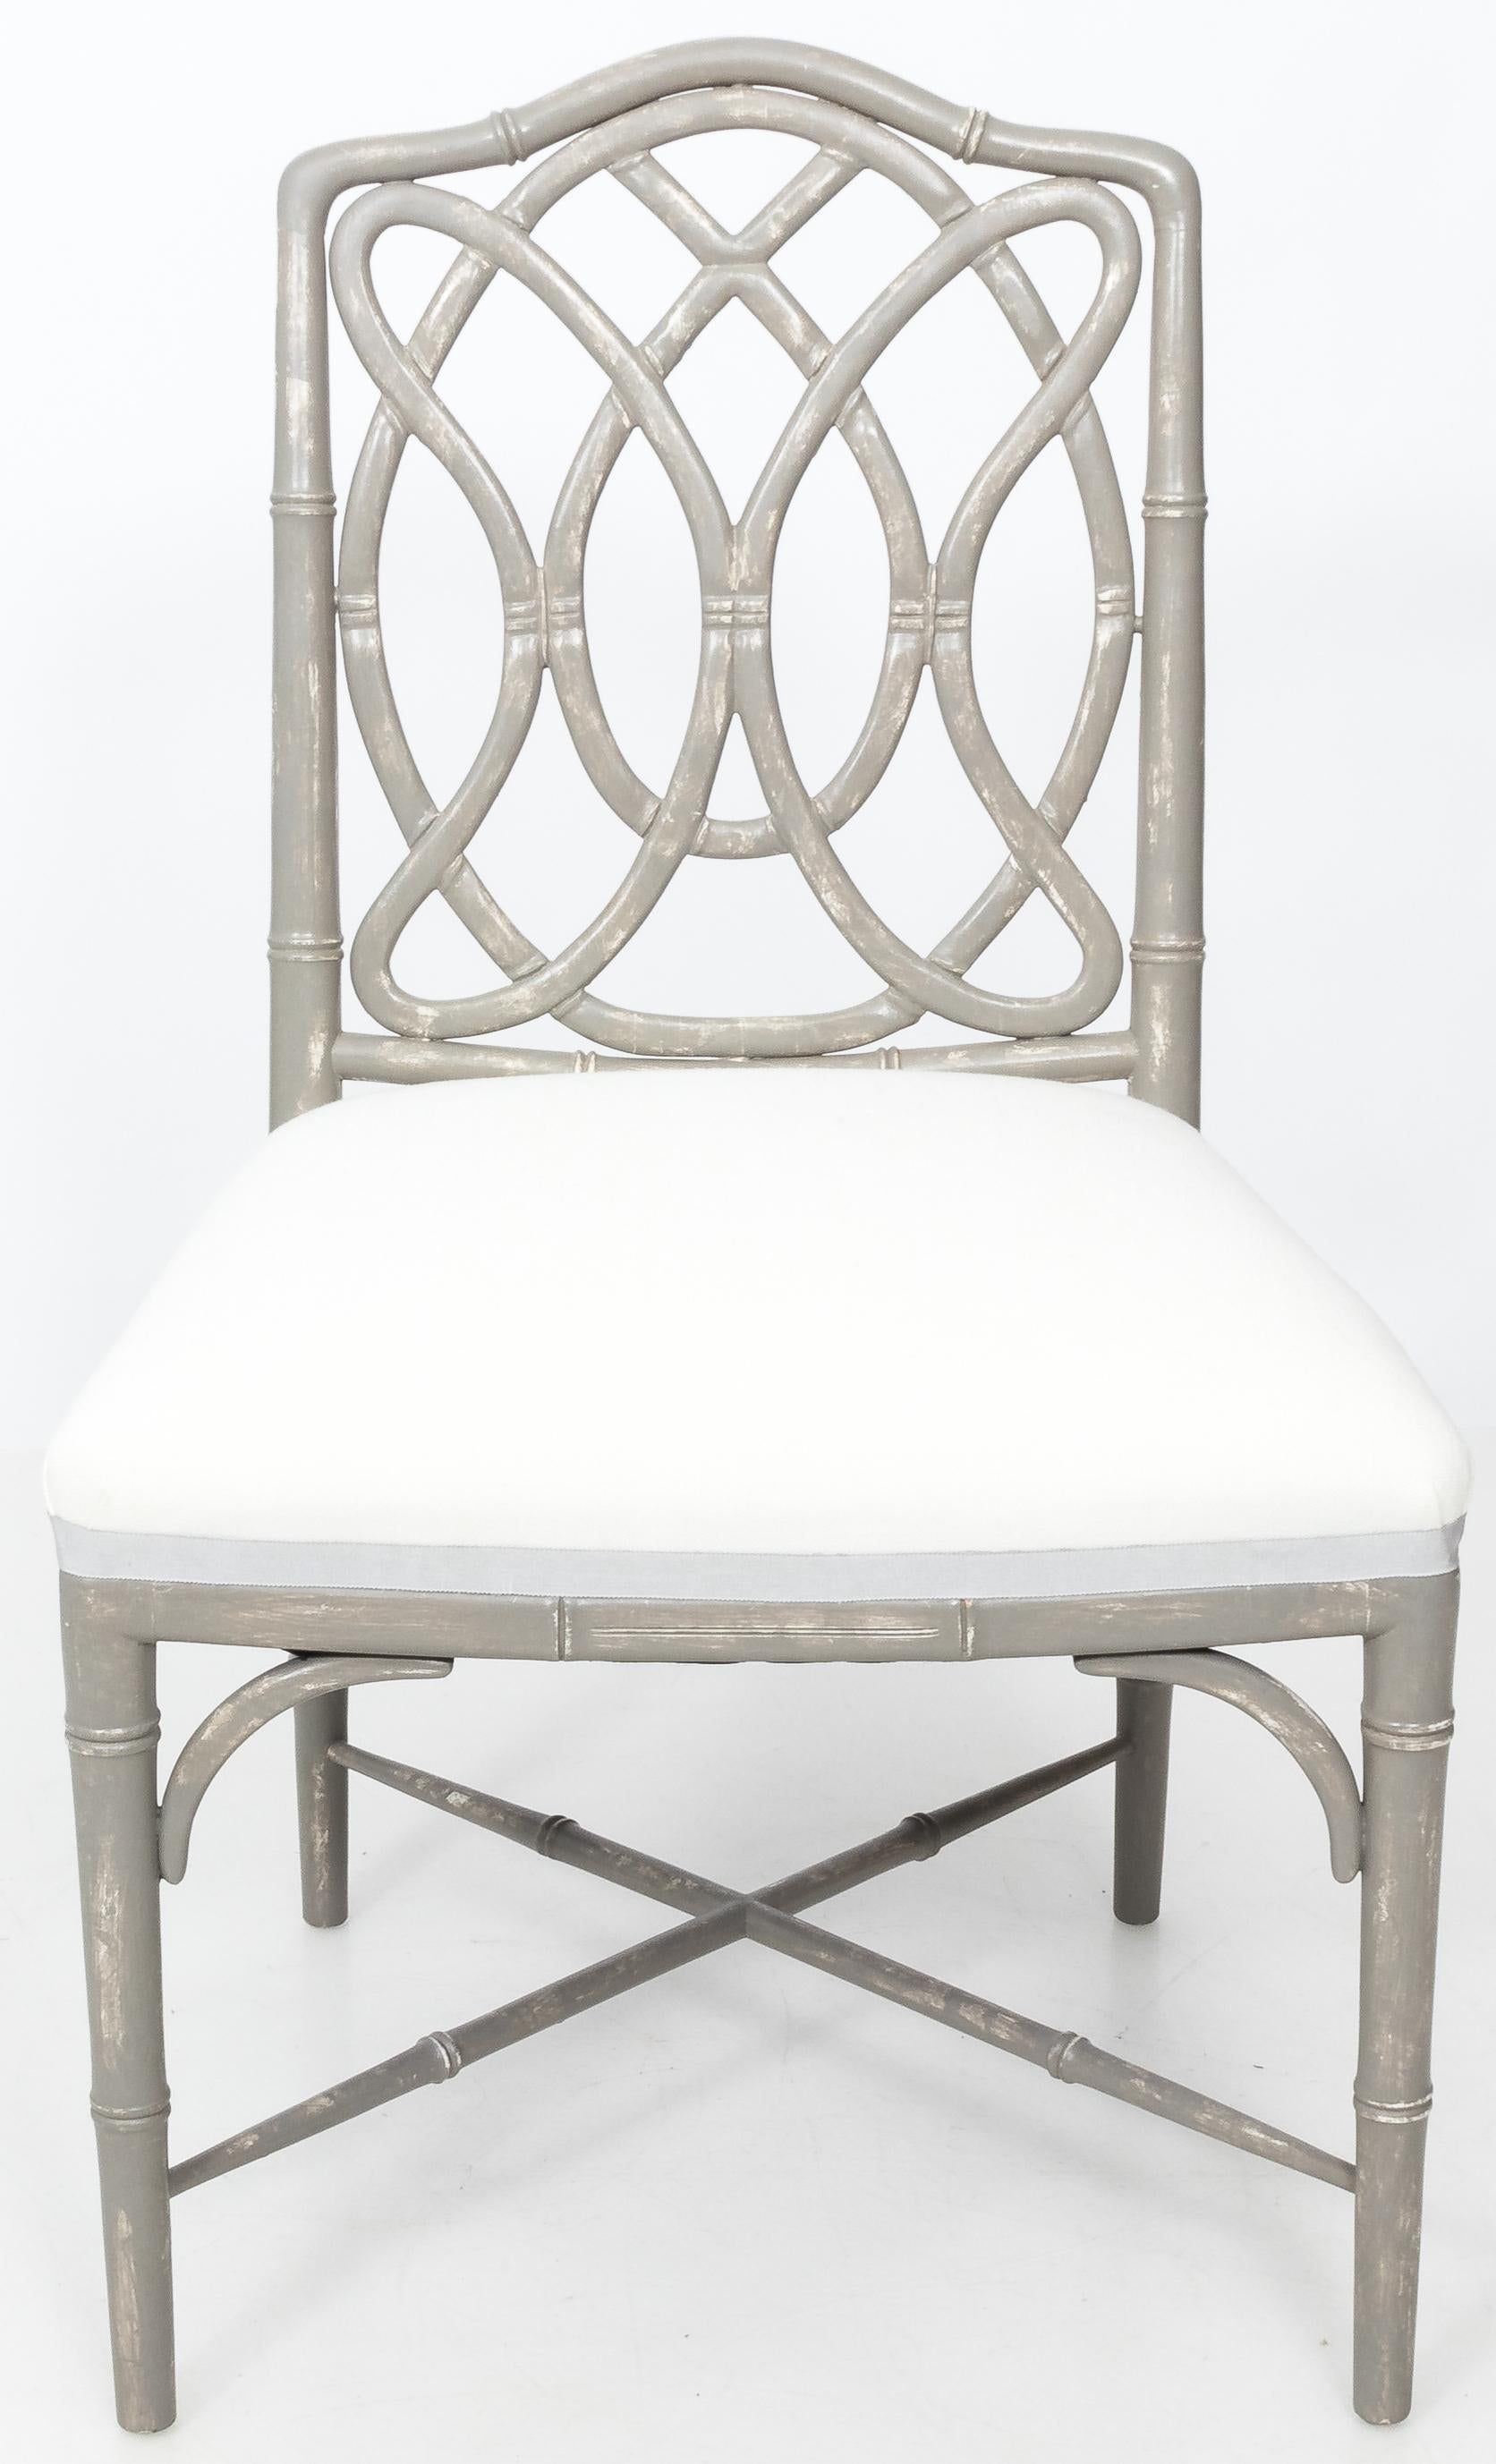 Set of 4 faux bamboo dining chairs. Loop back design. Newly refinished in antique gray painted finish. Newly upholstered in white linen with gray tape trim.
Also available priced per pair.